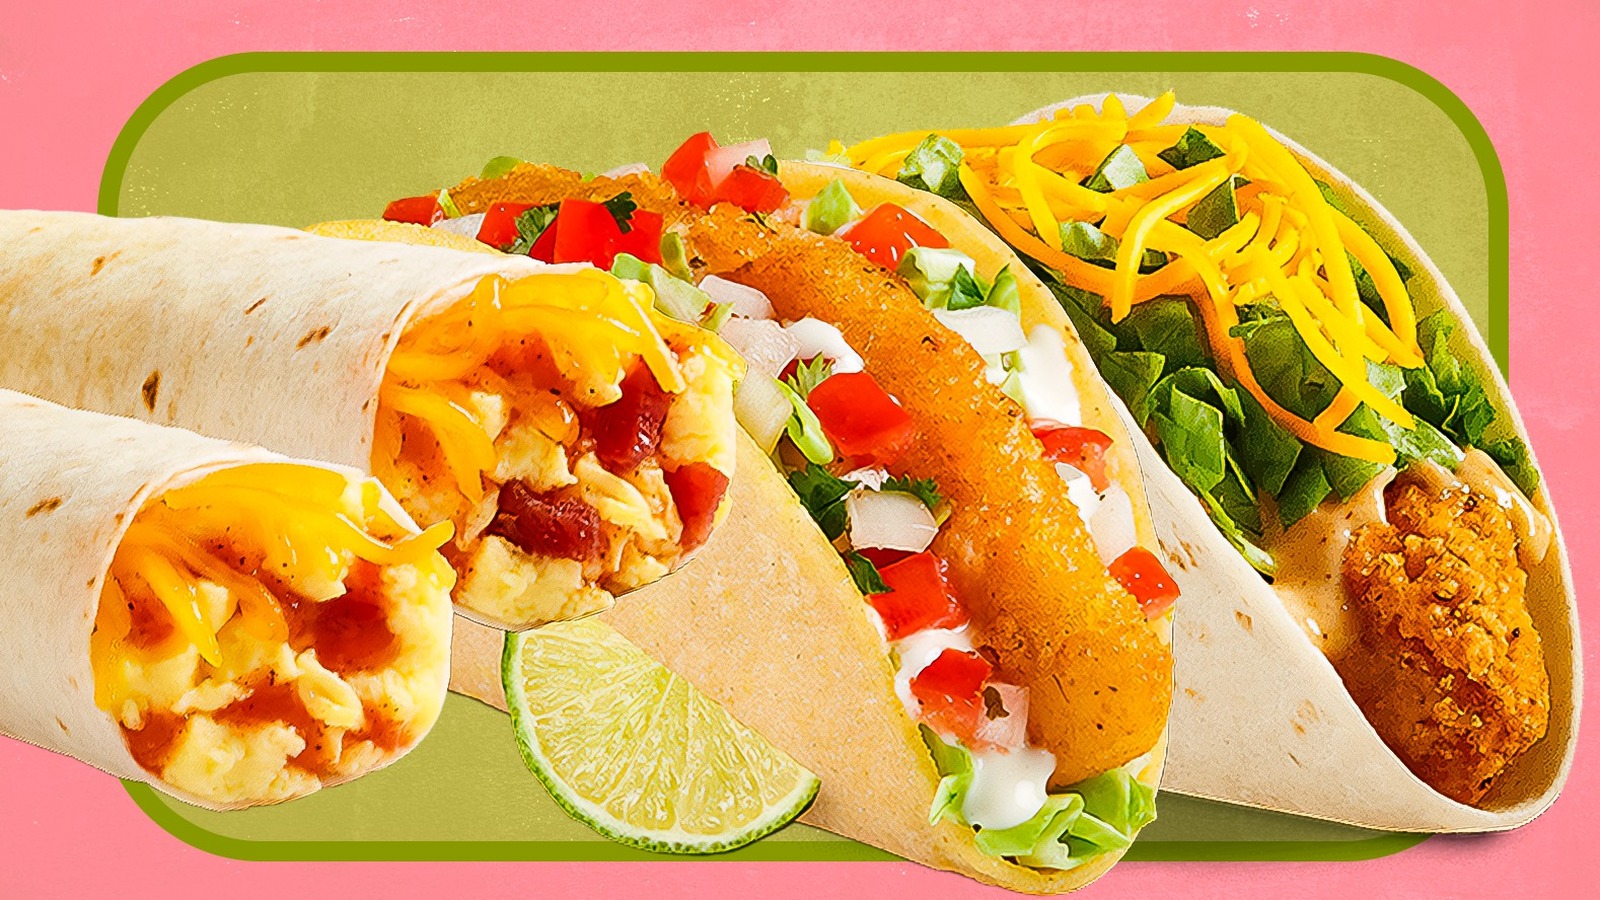 Healthiest Things You Can Order At Del Taco